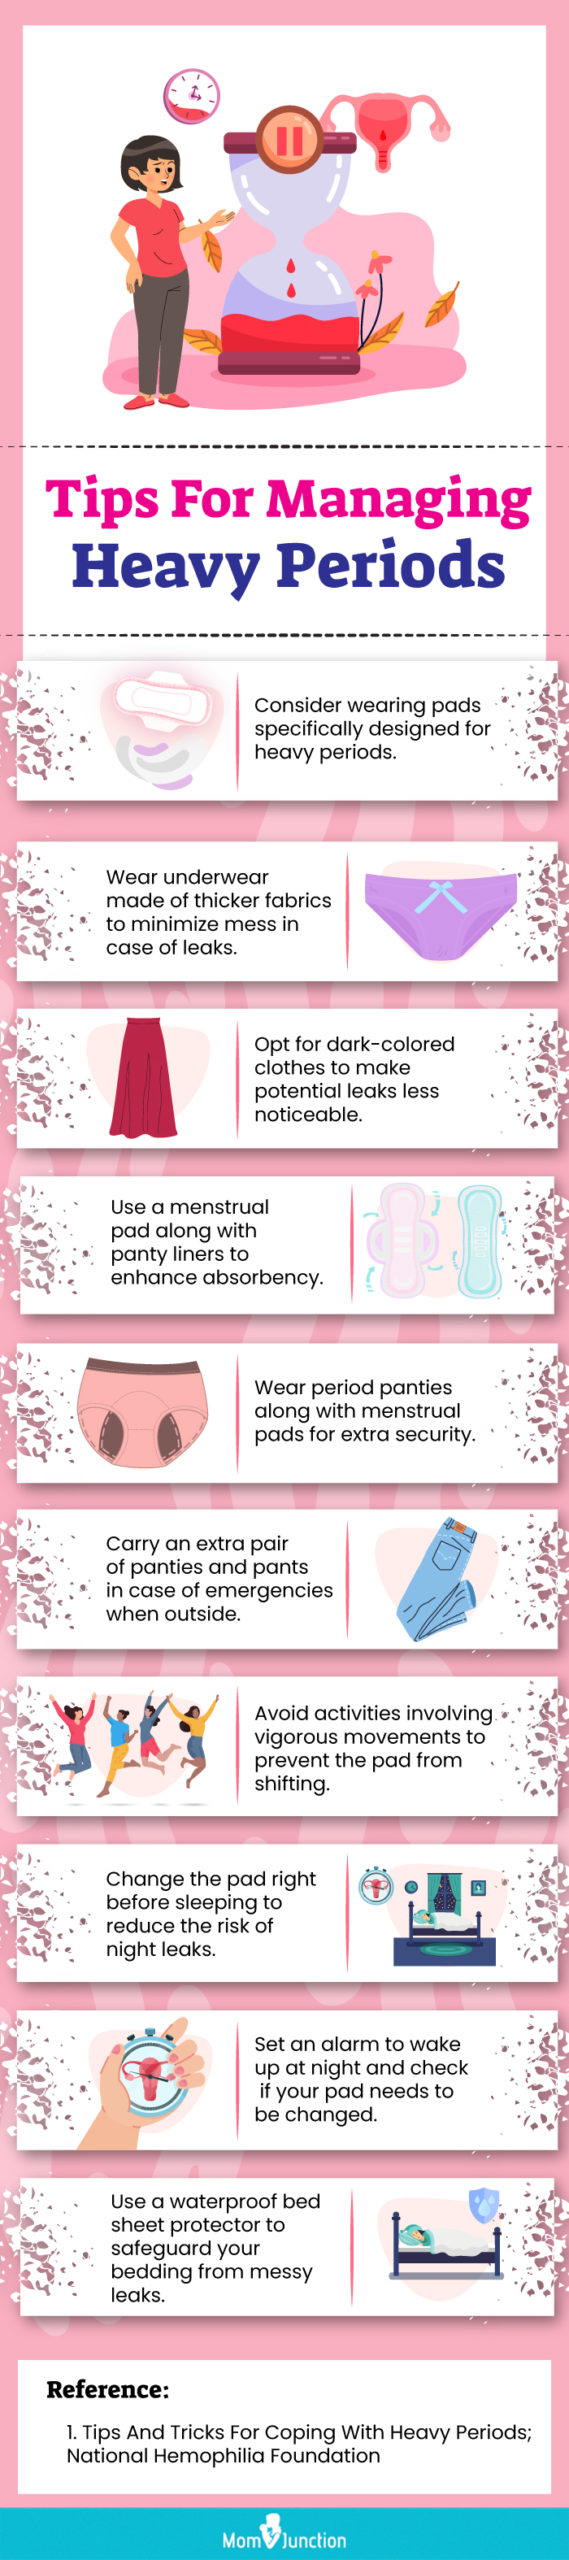 Tips For Managing Heavy Periods (infographic)